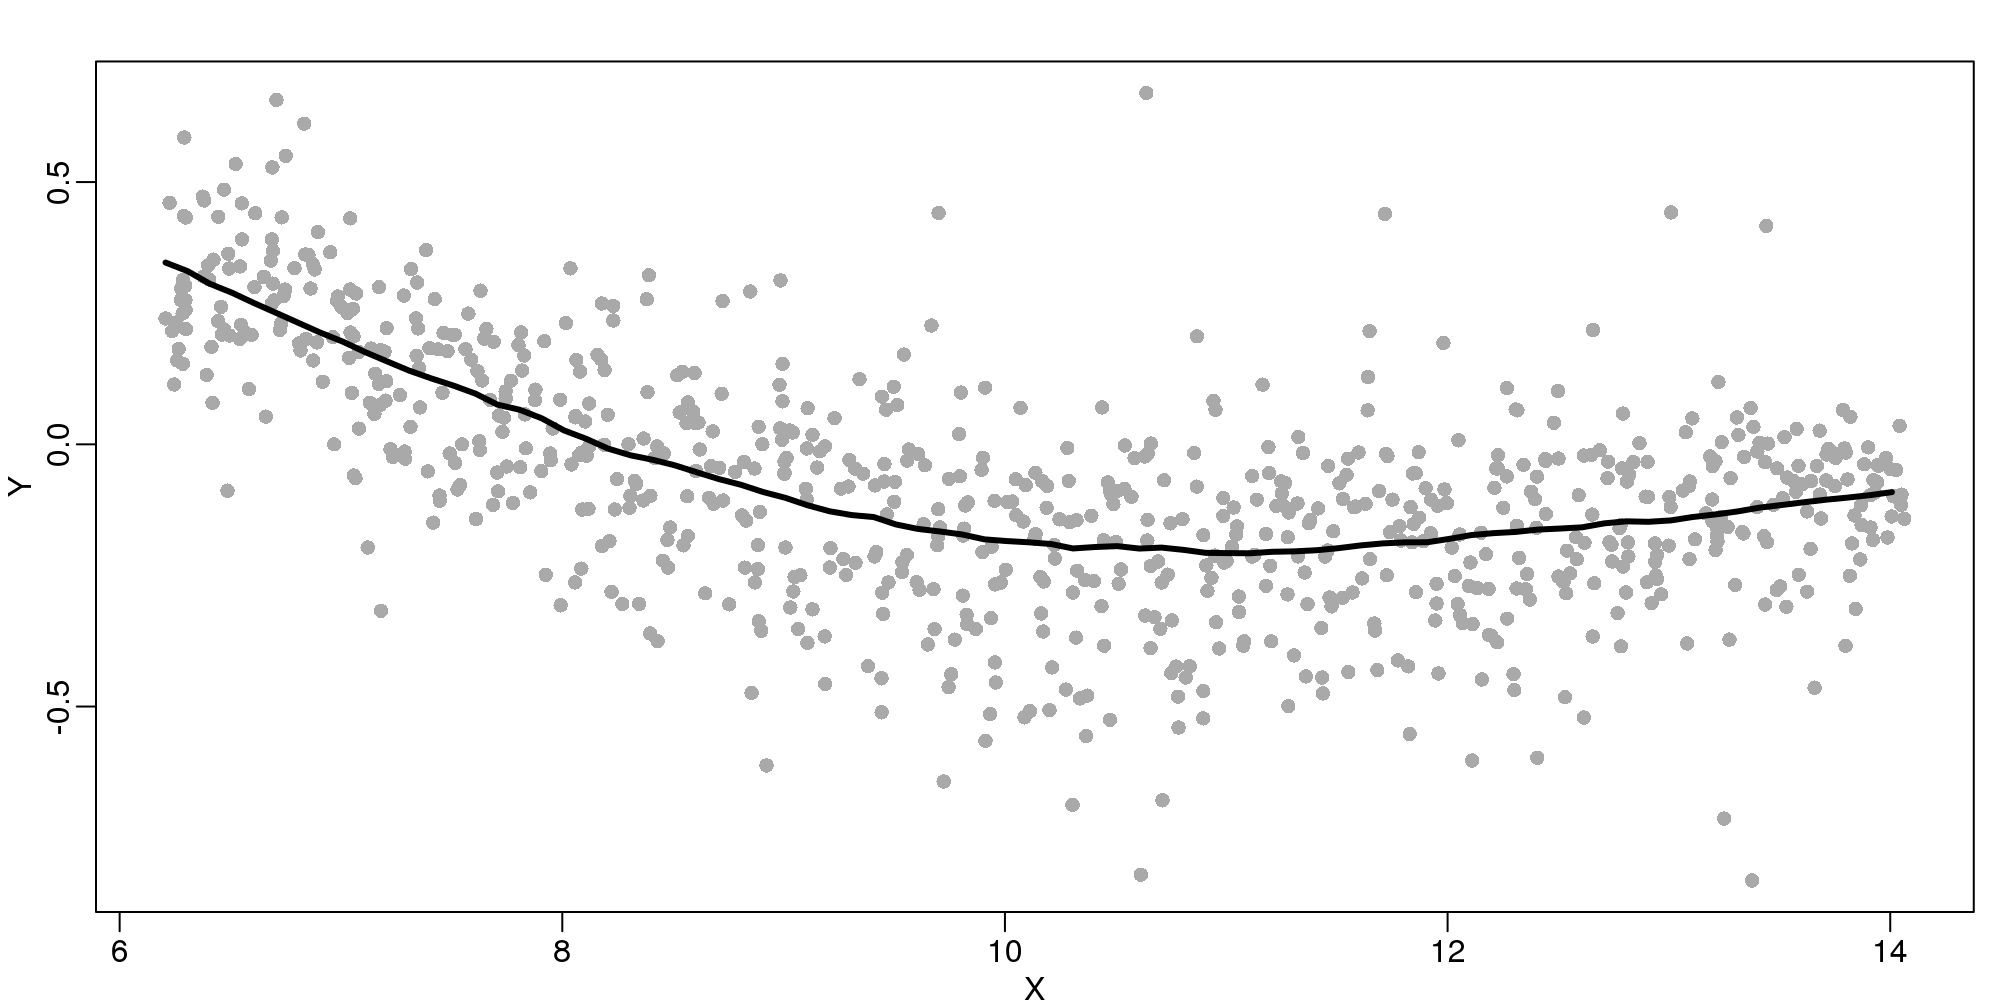 MA-plot with curve obtained with loess.